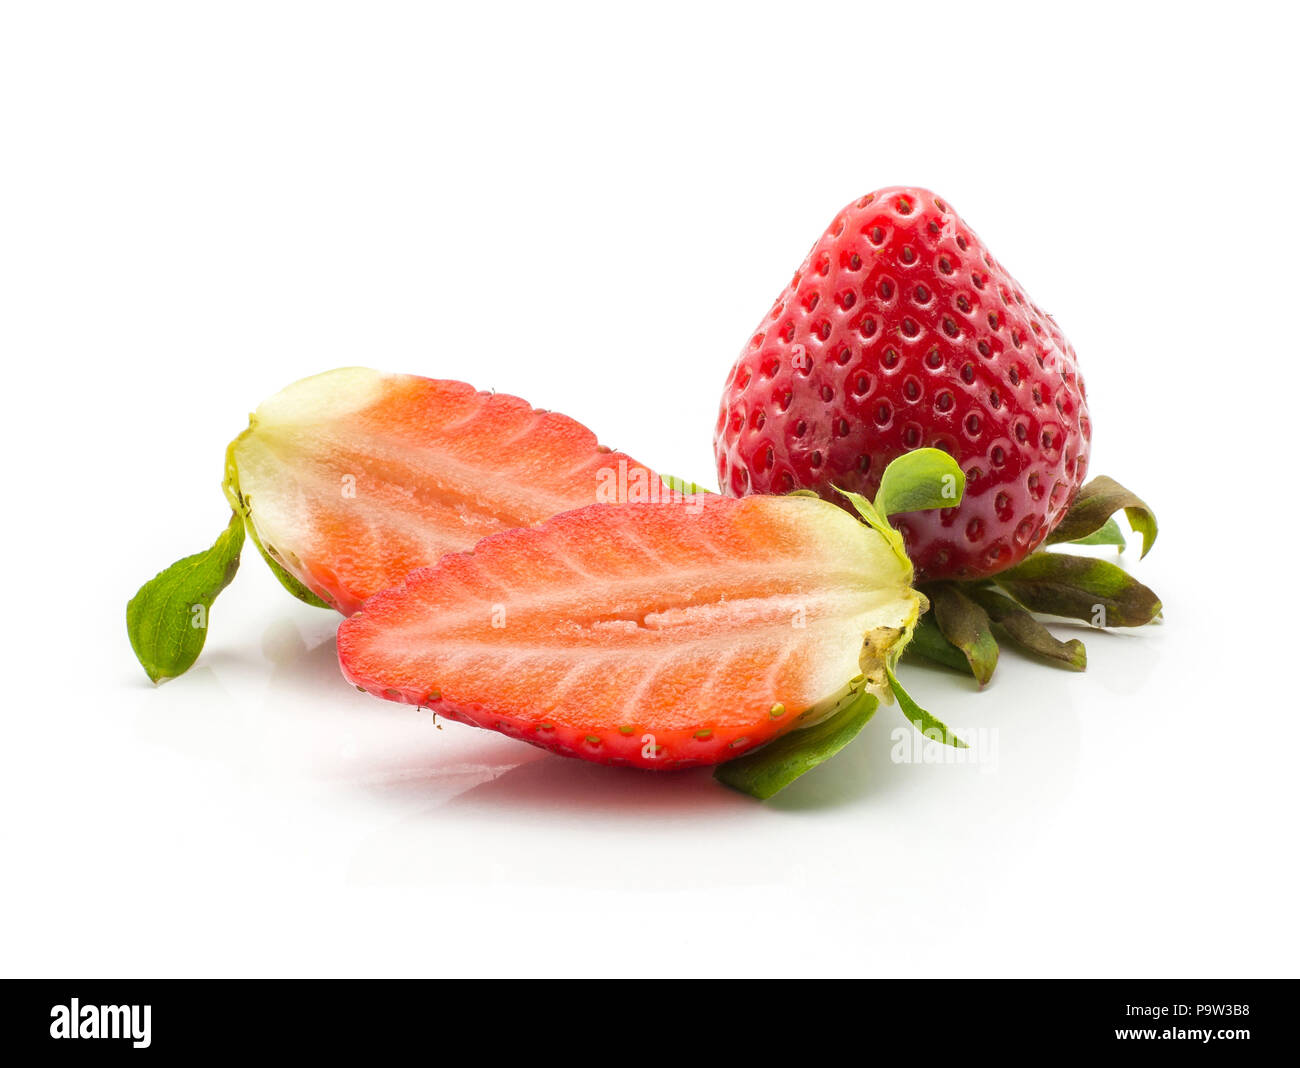 Two garden strawberries one sliced in two halves isolated on white background Stock Photo